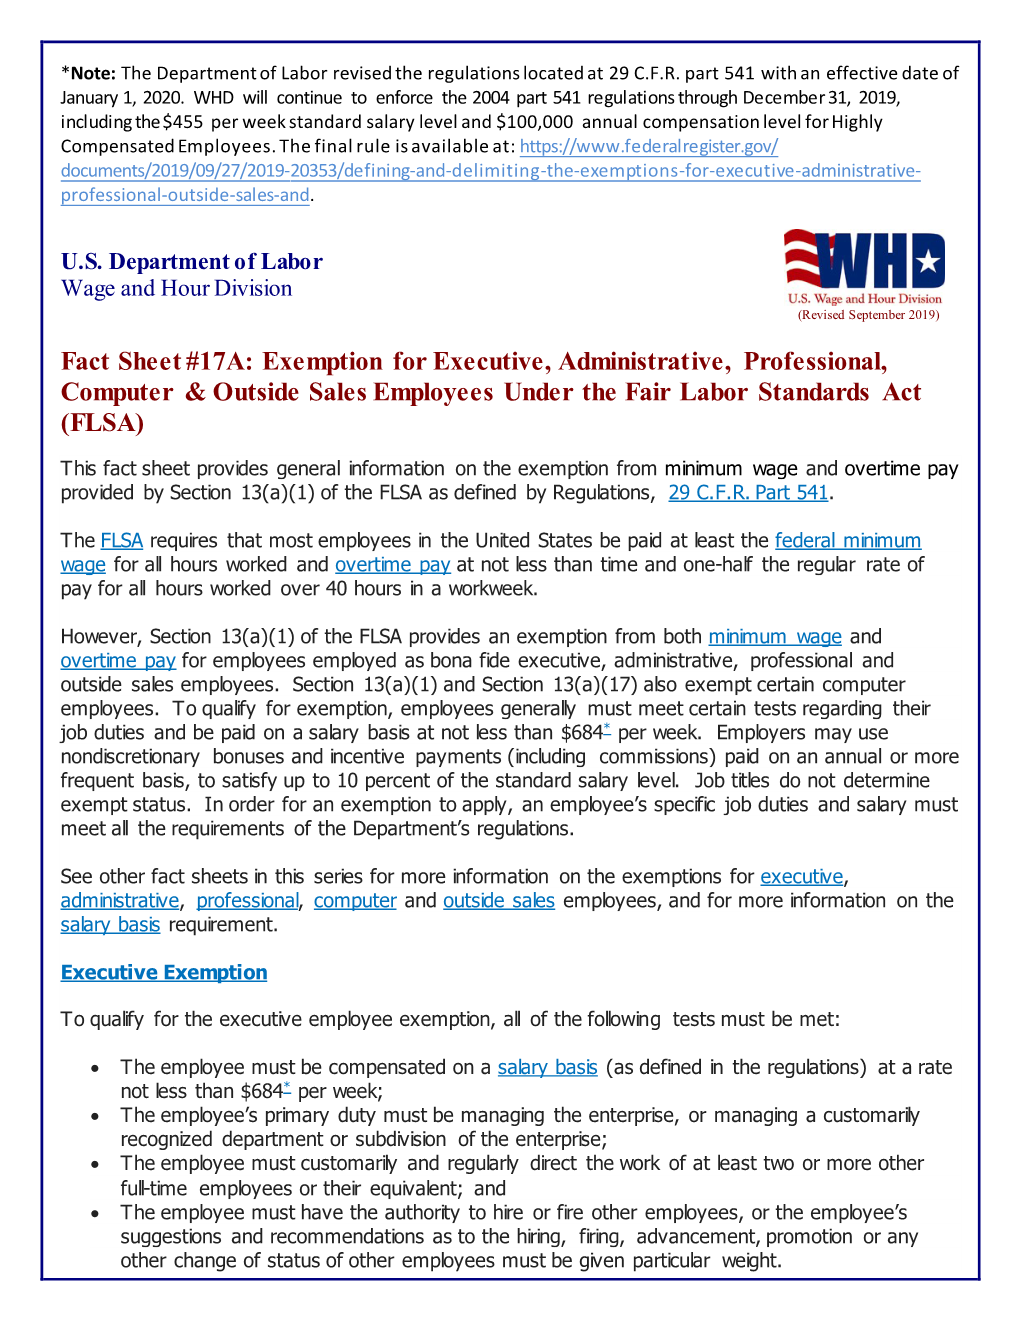 Fact Sheet #17A: Exemption for Executive, Administrative, Professional, Computer & Outside Sales Employees Under the Fair Labor Standards Act (FLSA)